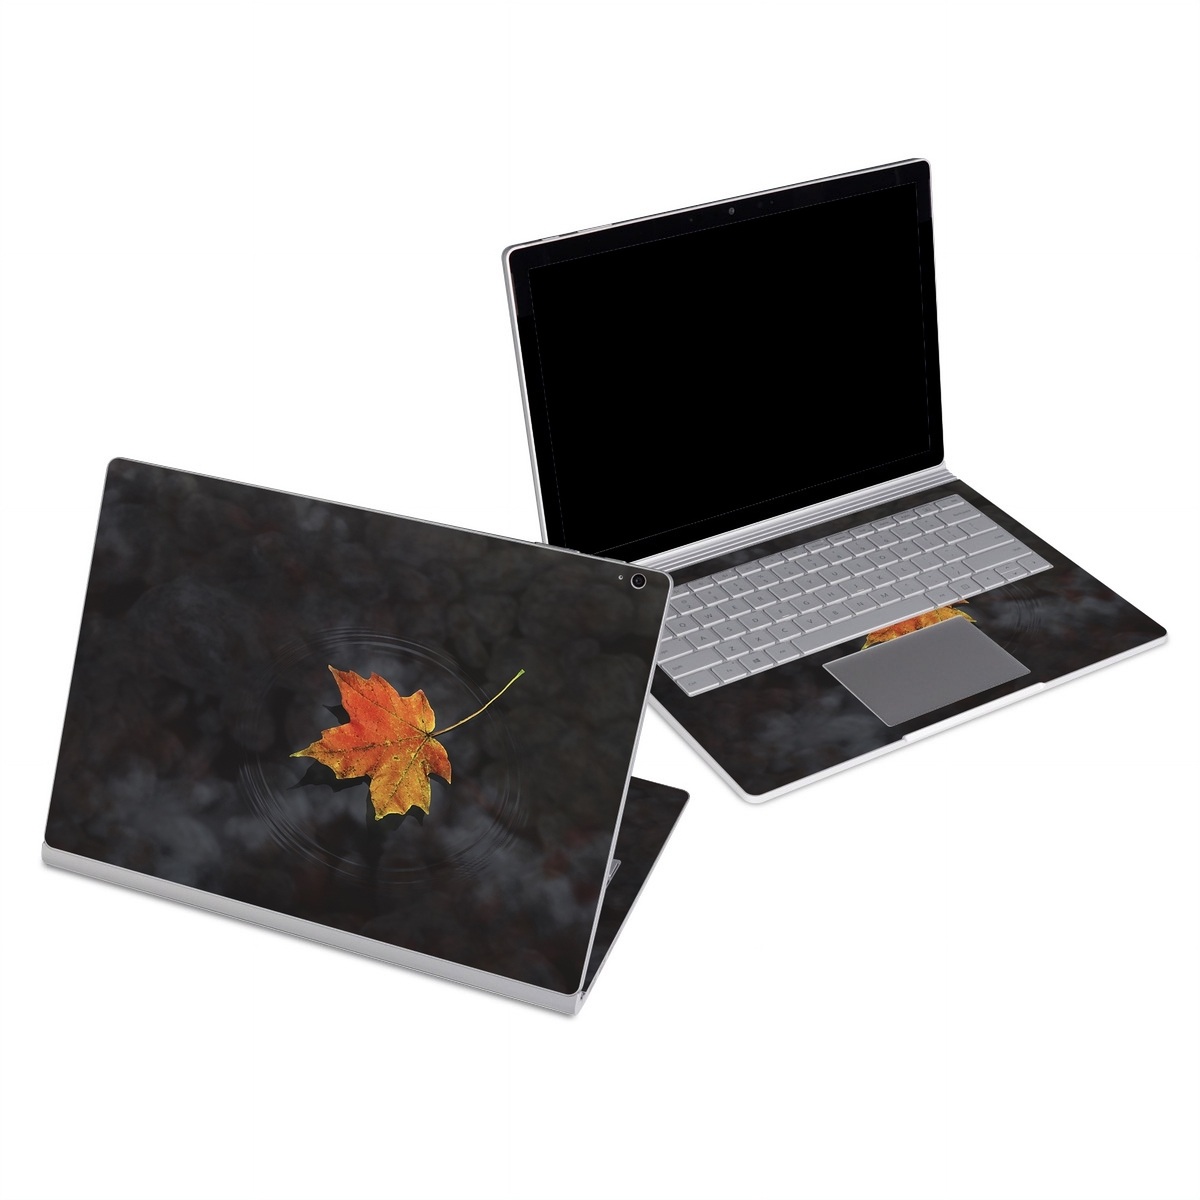 Microsoft Surface Book Series Skin design of Leaf, Maple leaf, Tree, Black maple, Sky, Yellow, Deciduous, Orange, Autumn, Red, with black, red, green colors